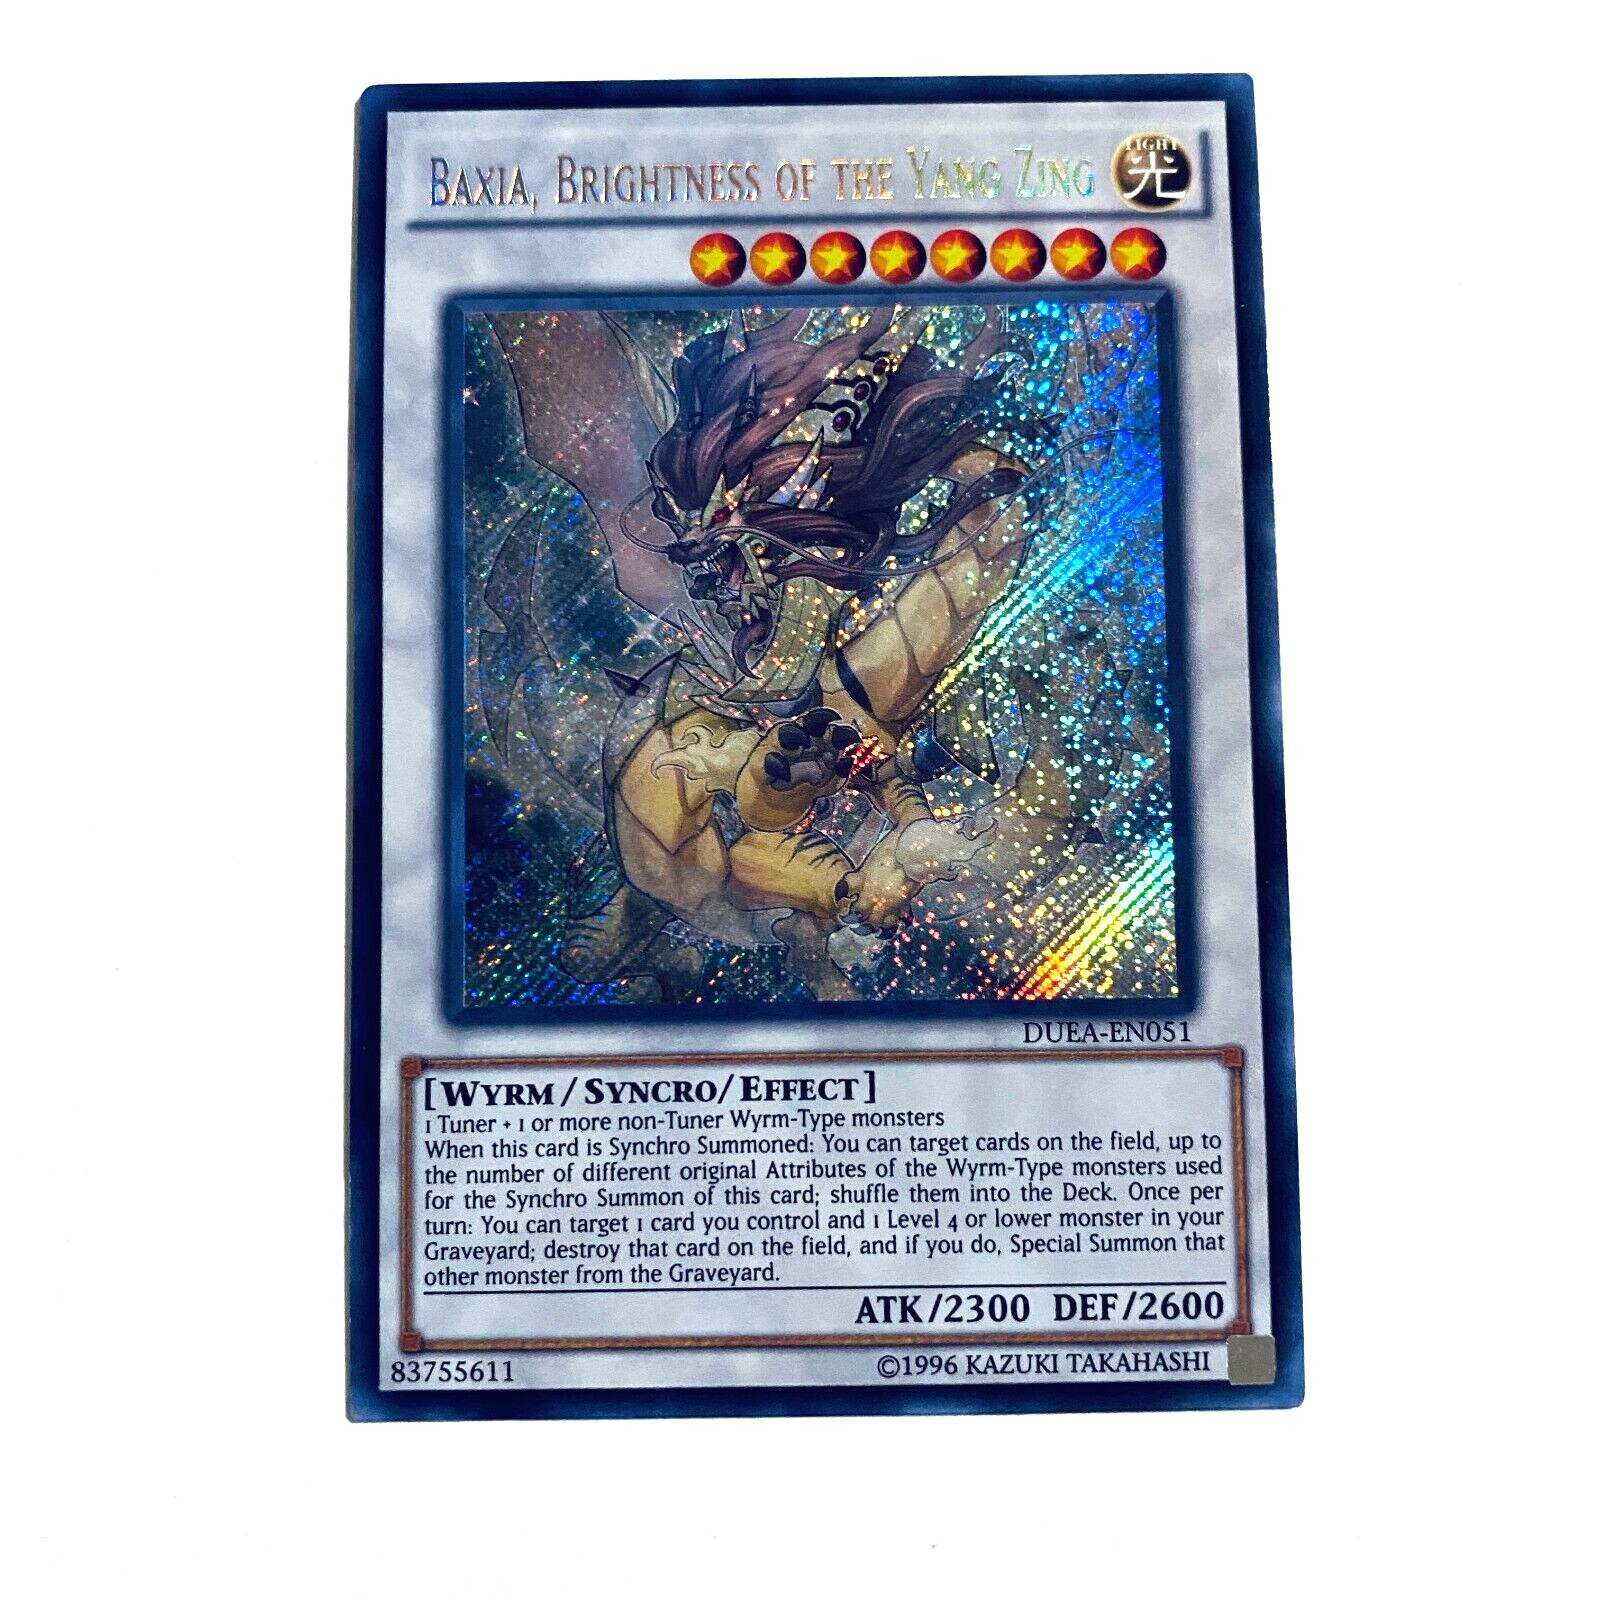 Yugioh Baxia, Brightness of the Yang Zing Ultimate DUEA-EN051 Lightly Played LP